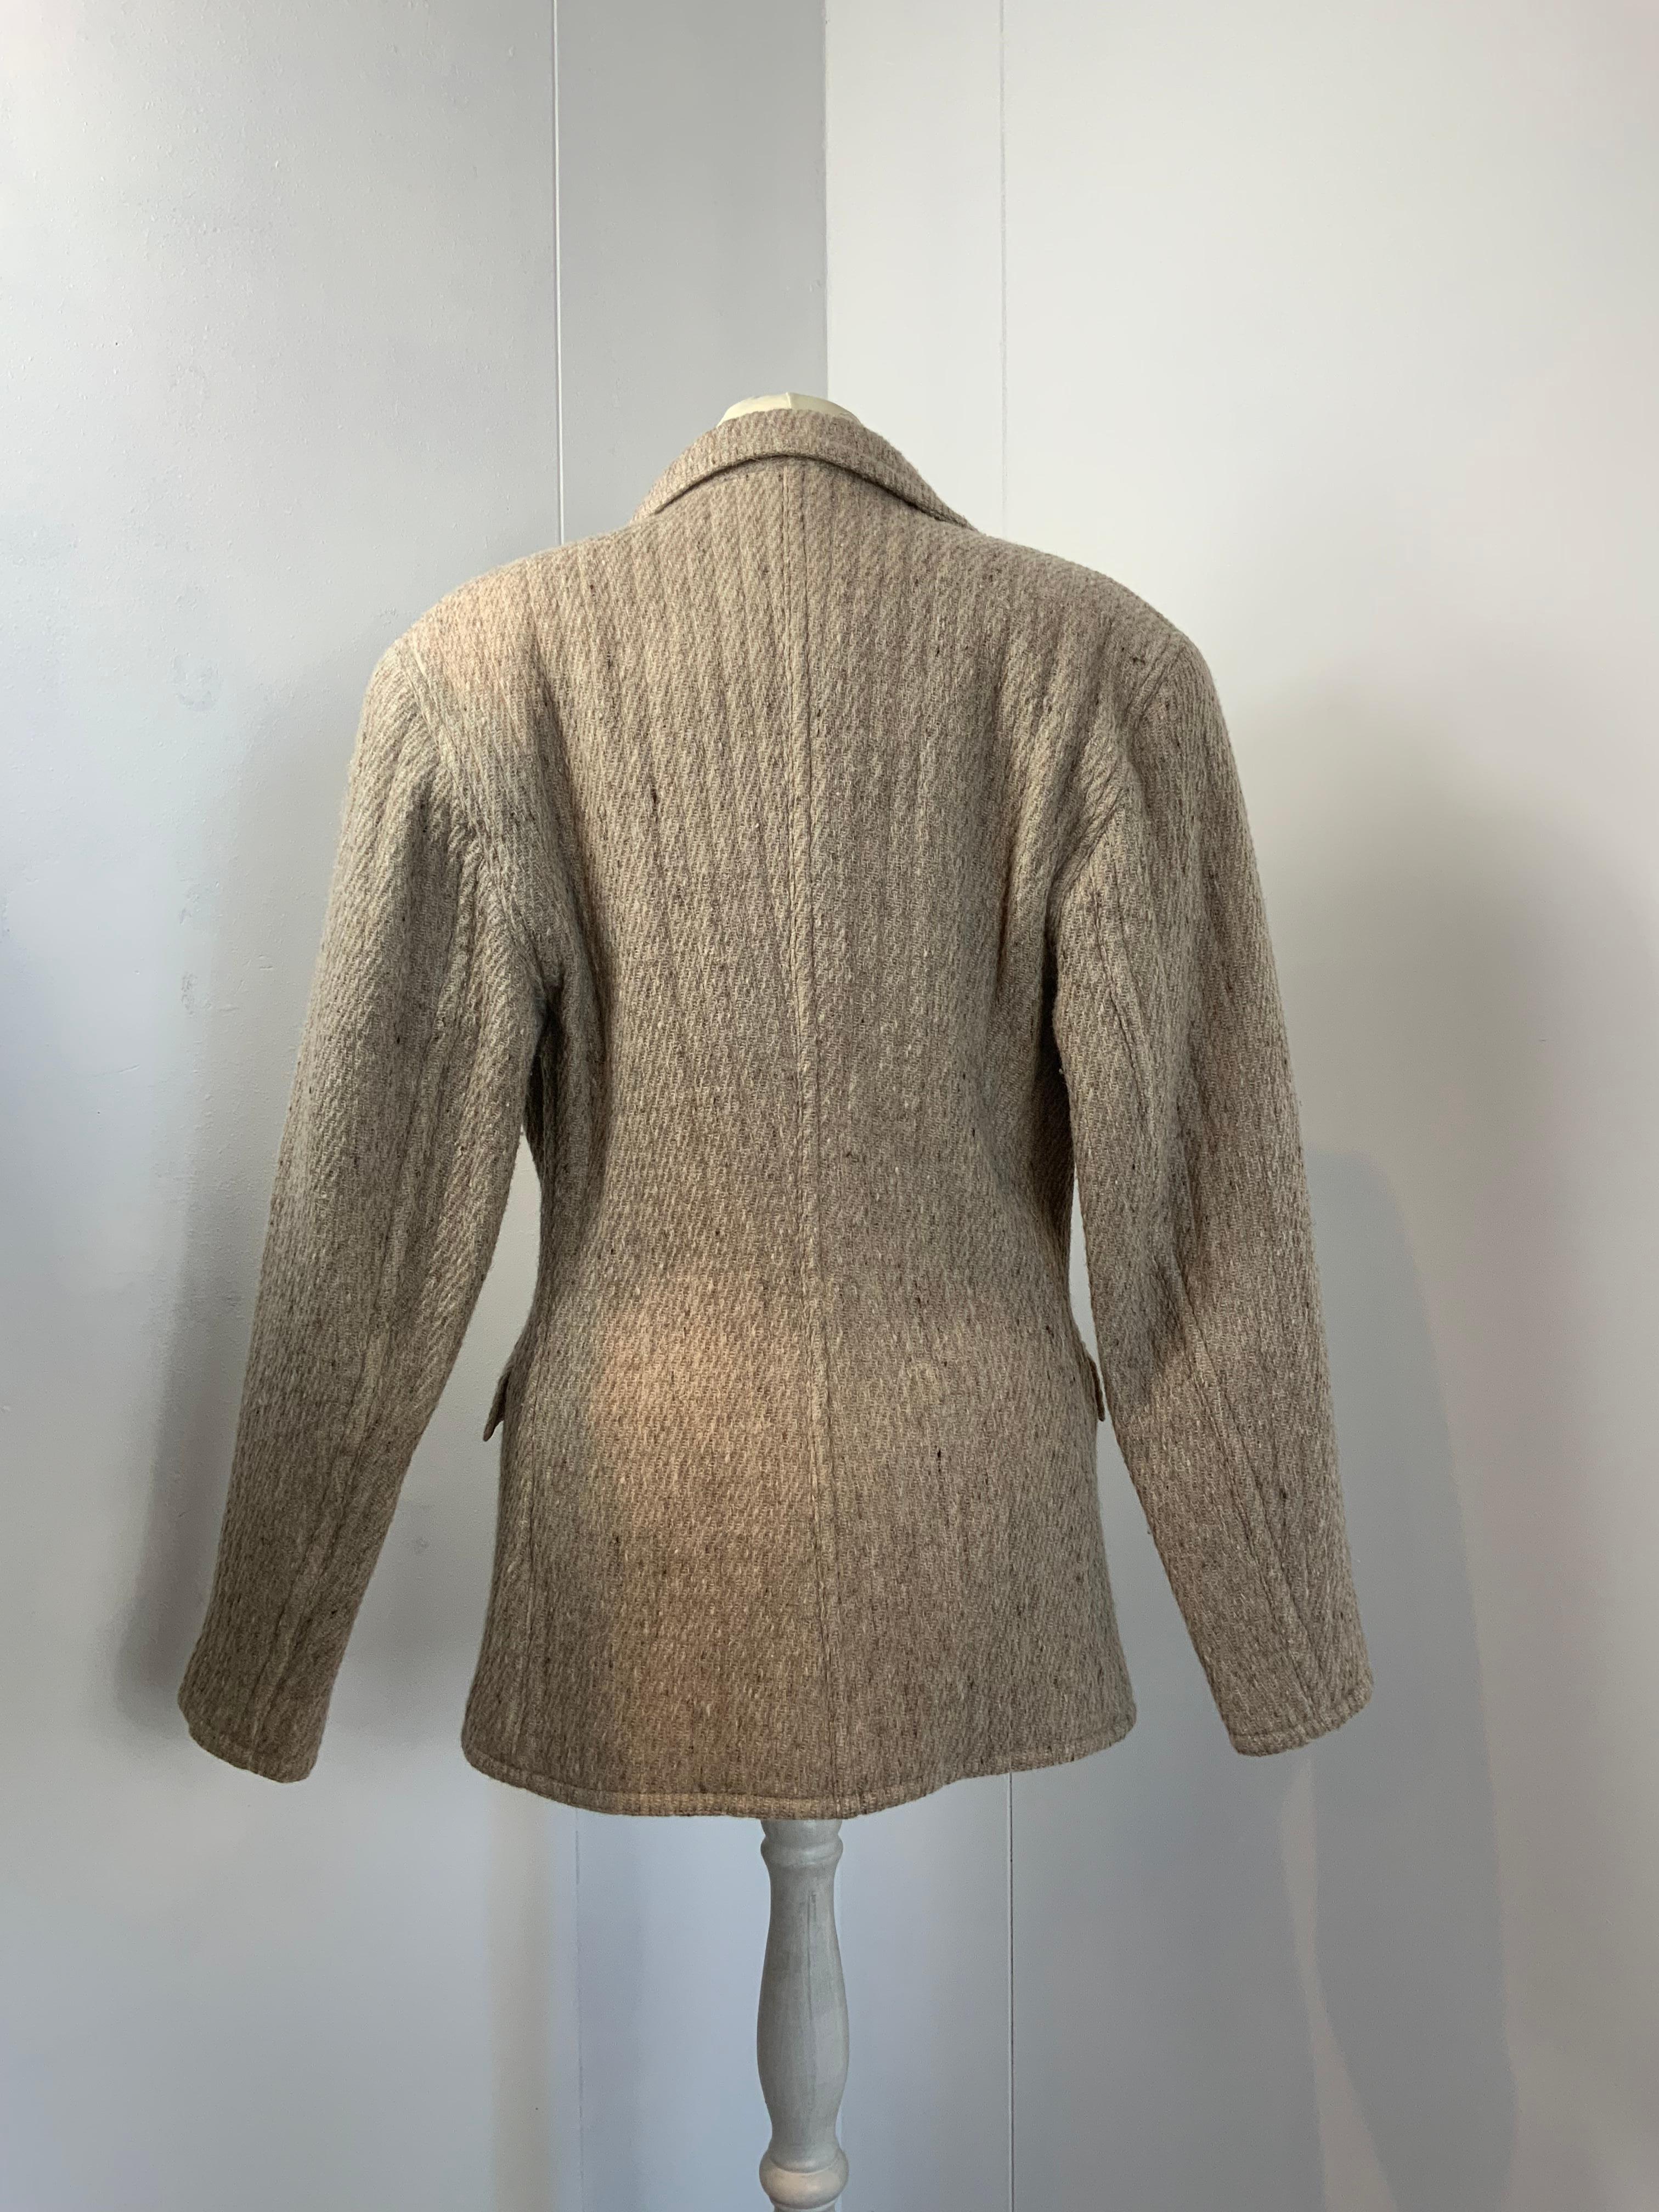 Gianni Versace vintage Jacket. 
Fabric is a mix between wool, alpaca and polyamid.
Featuring a V line neck, four front pockets and padded shoulders.
Size 38 Italian. But it fits bigger.
Measurements:
Shoulders 47 cm
Bust 42 cm
Sleeves 60 cm
Length